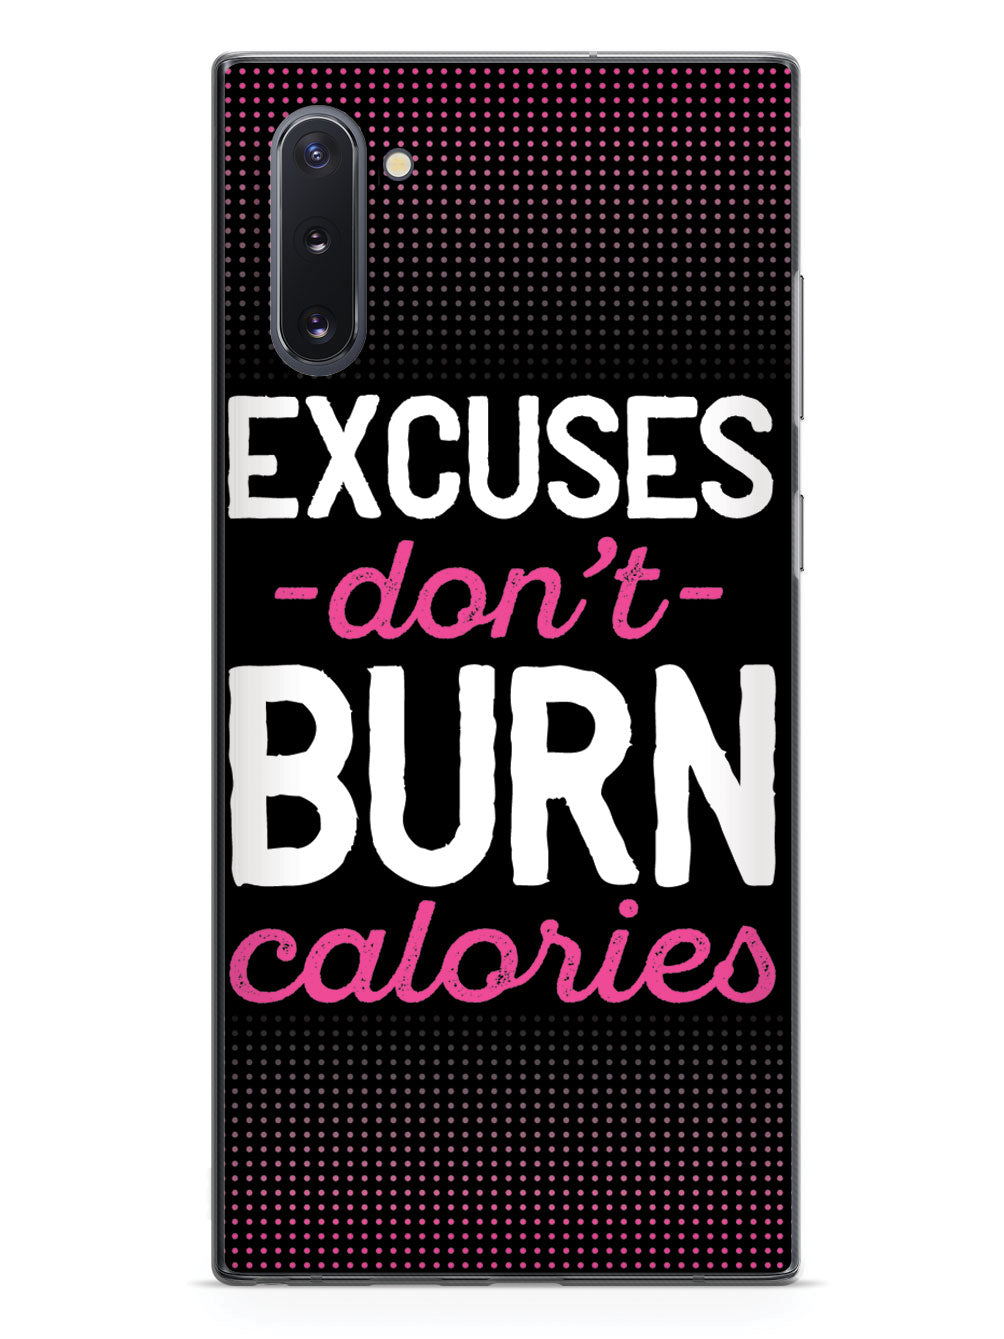 Excuses Don't Burn Calories - Fitness Case